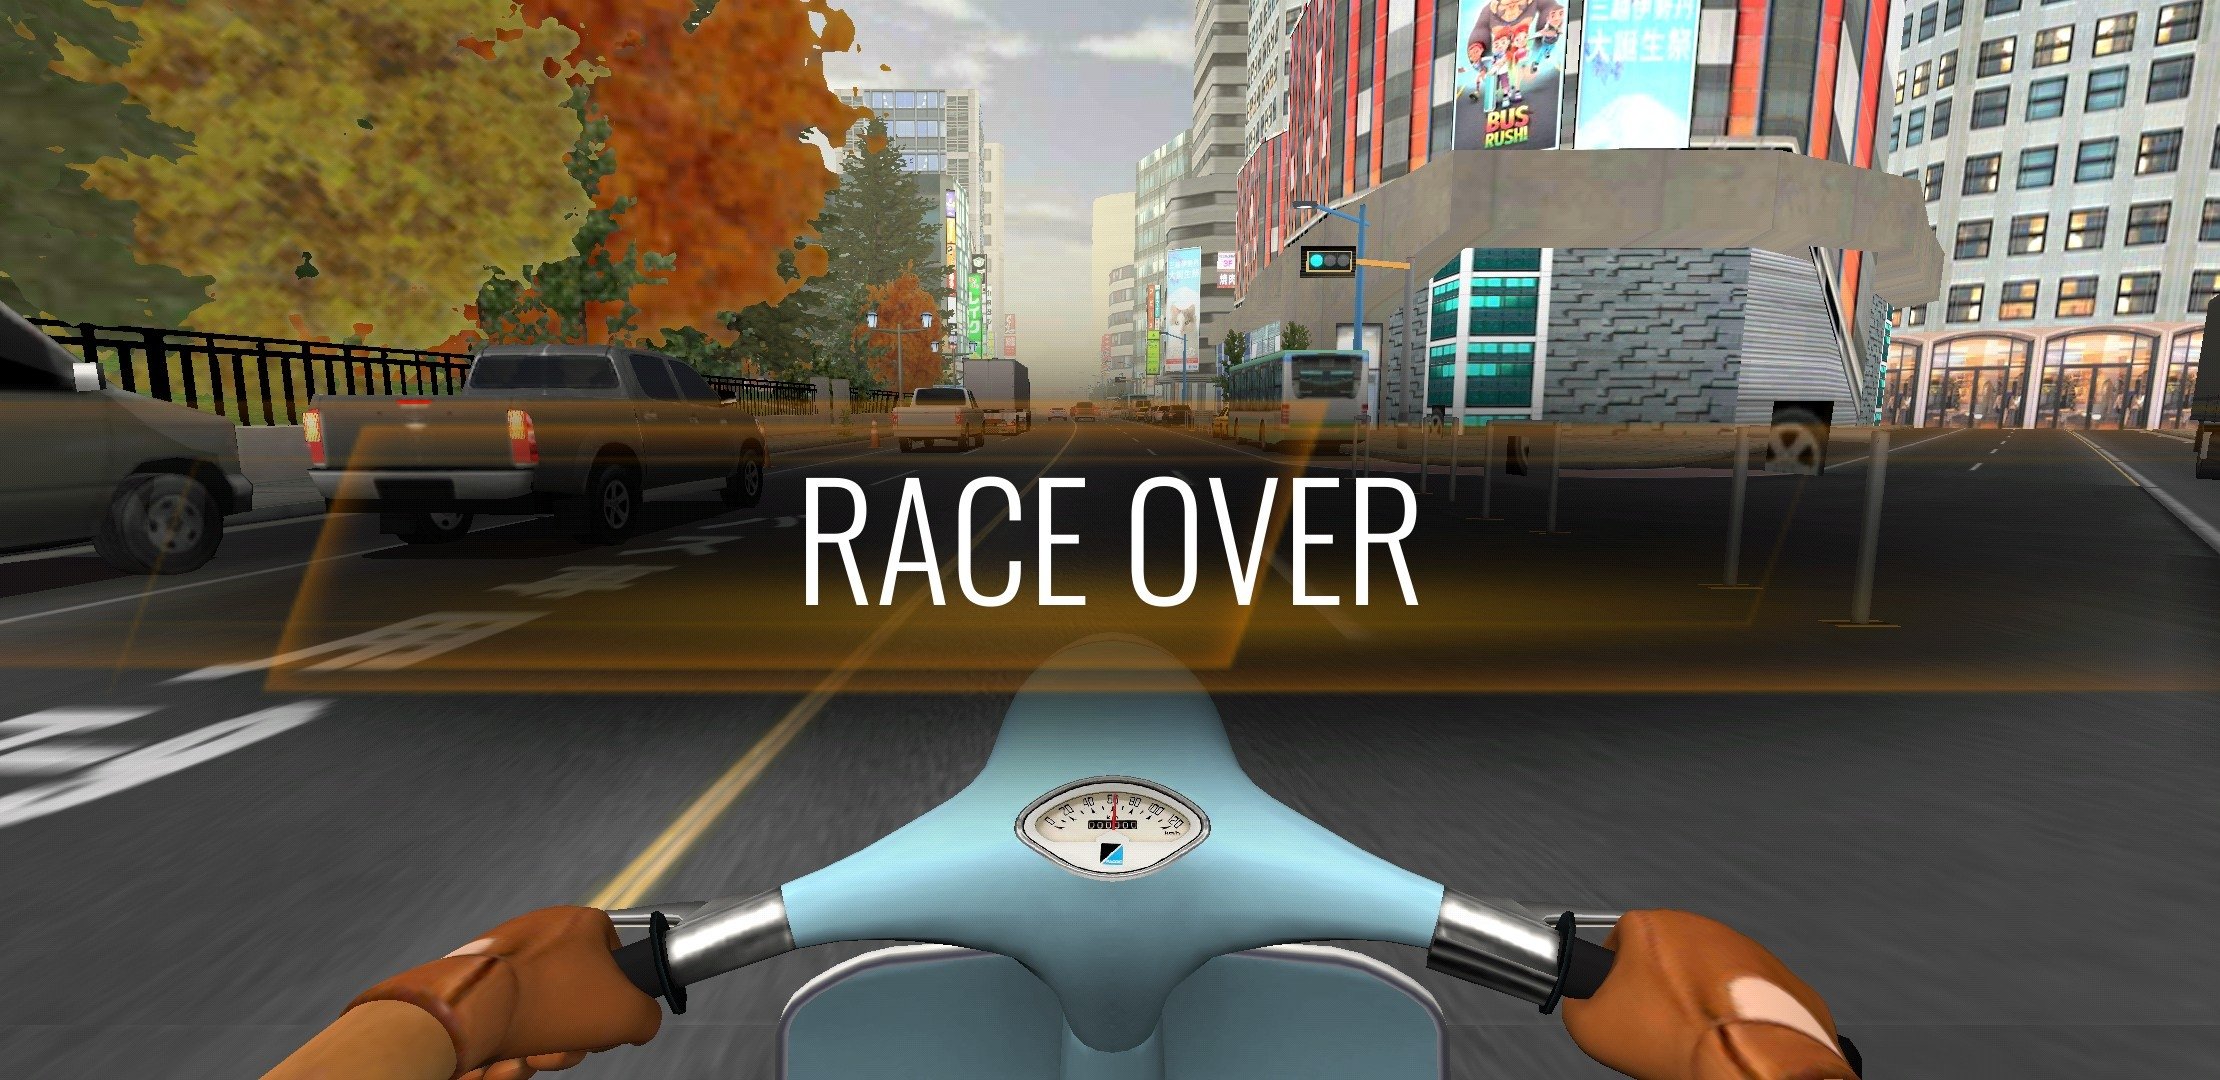 Baixar Race the Traffic Moto 1.2 Android - Download APK Grátis